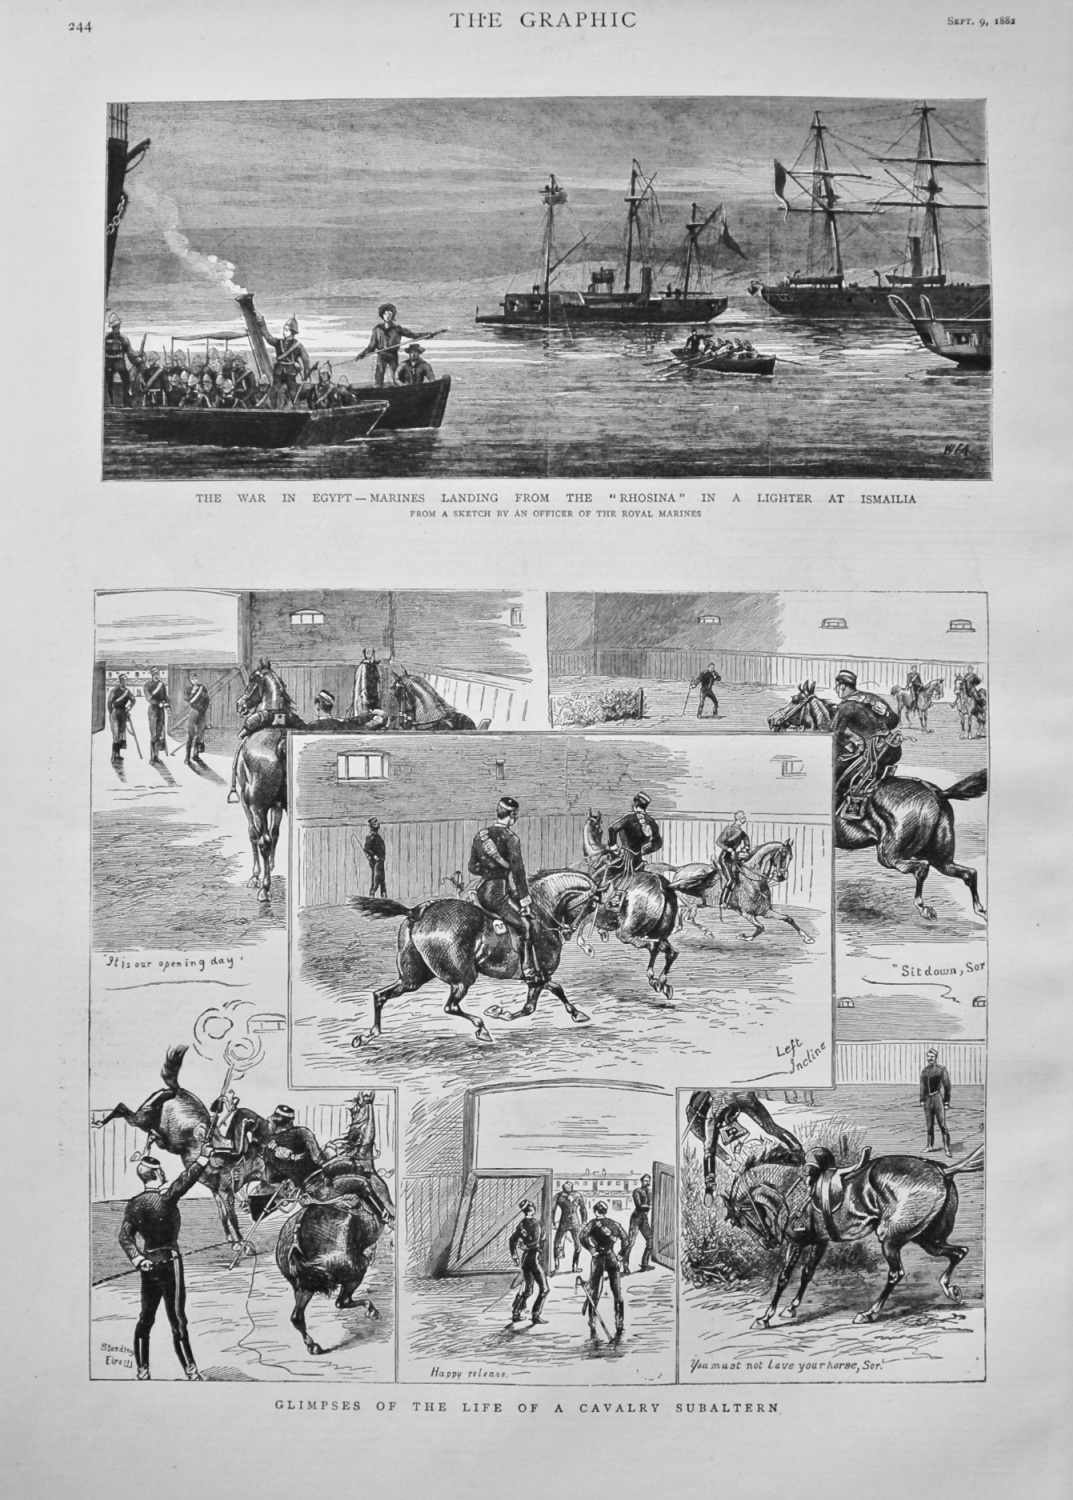 Glimpses of the Life of a Cavalry Subaltern. 1882